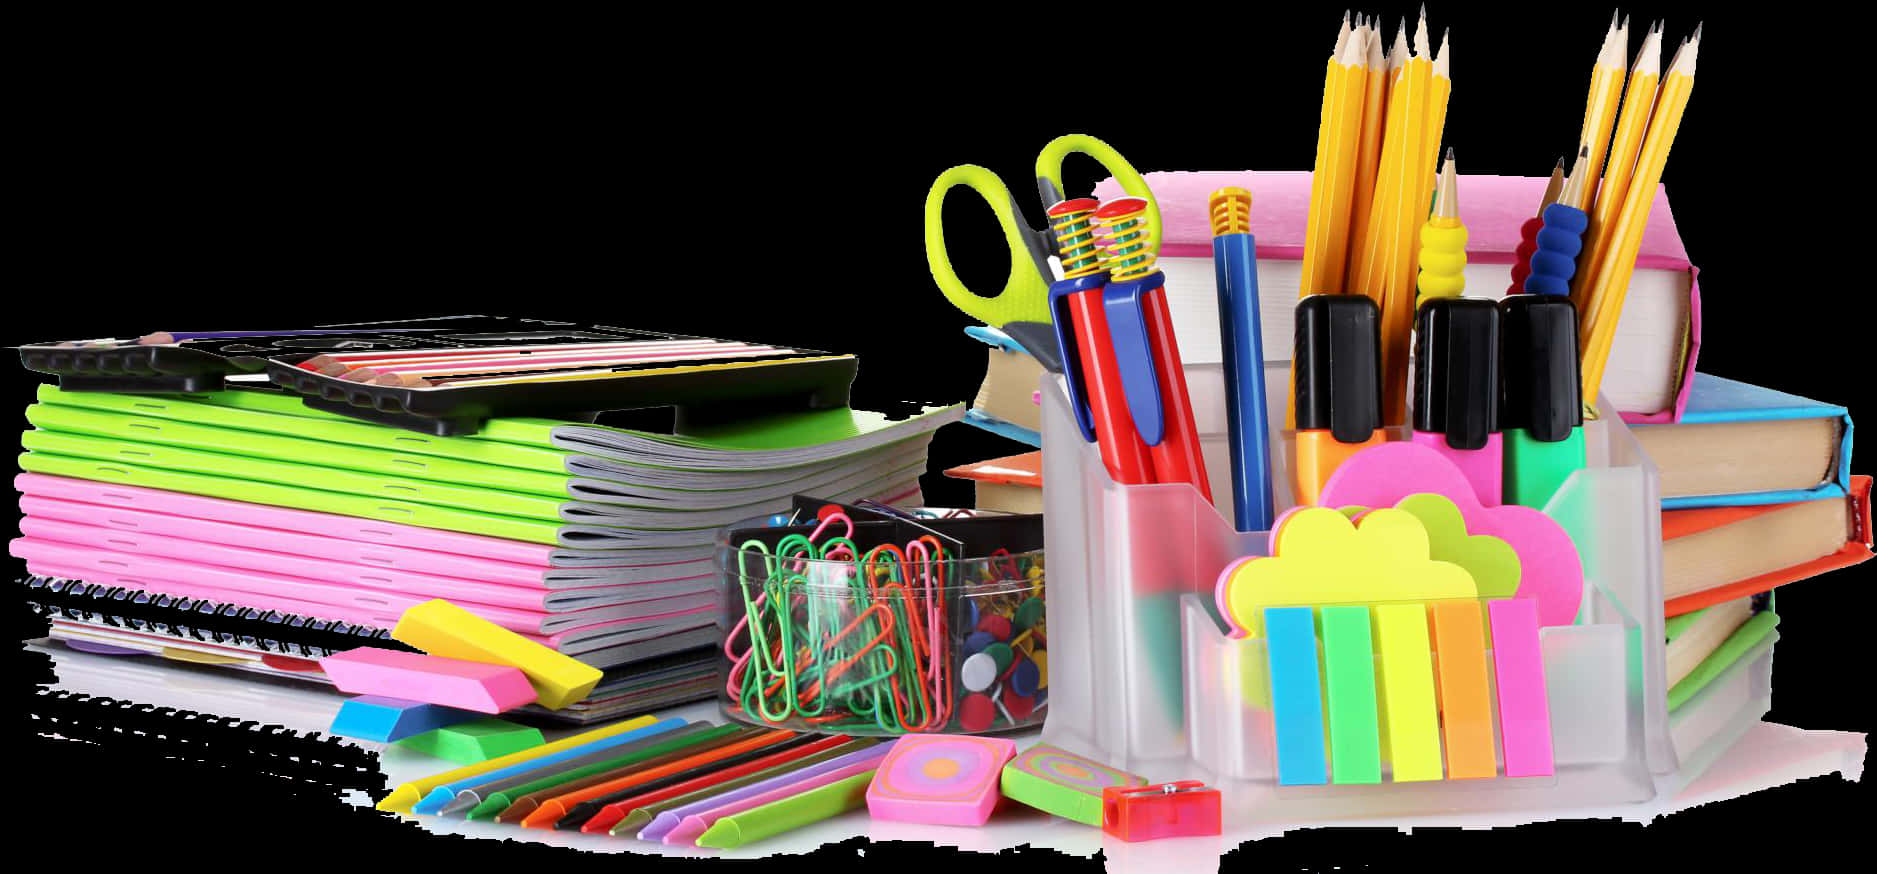 A Group Of Office Supplies